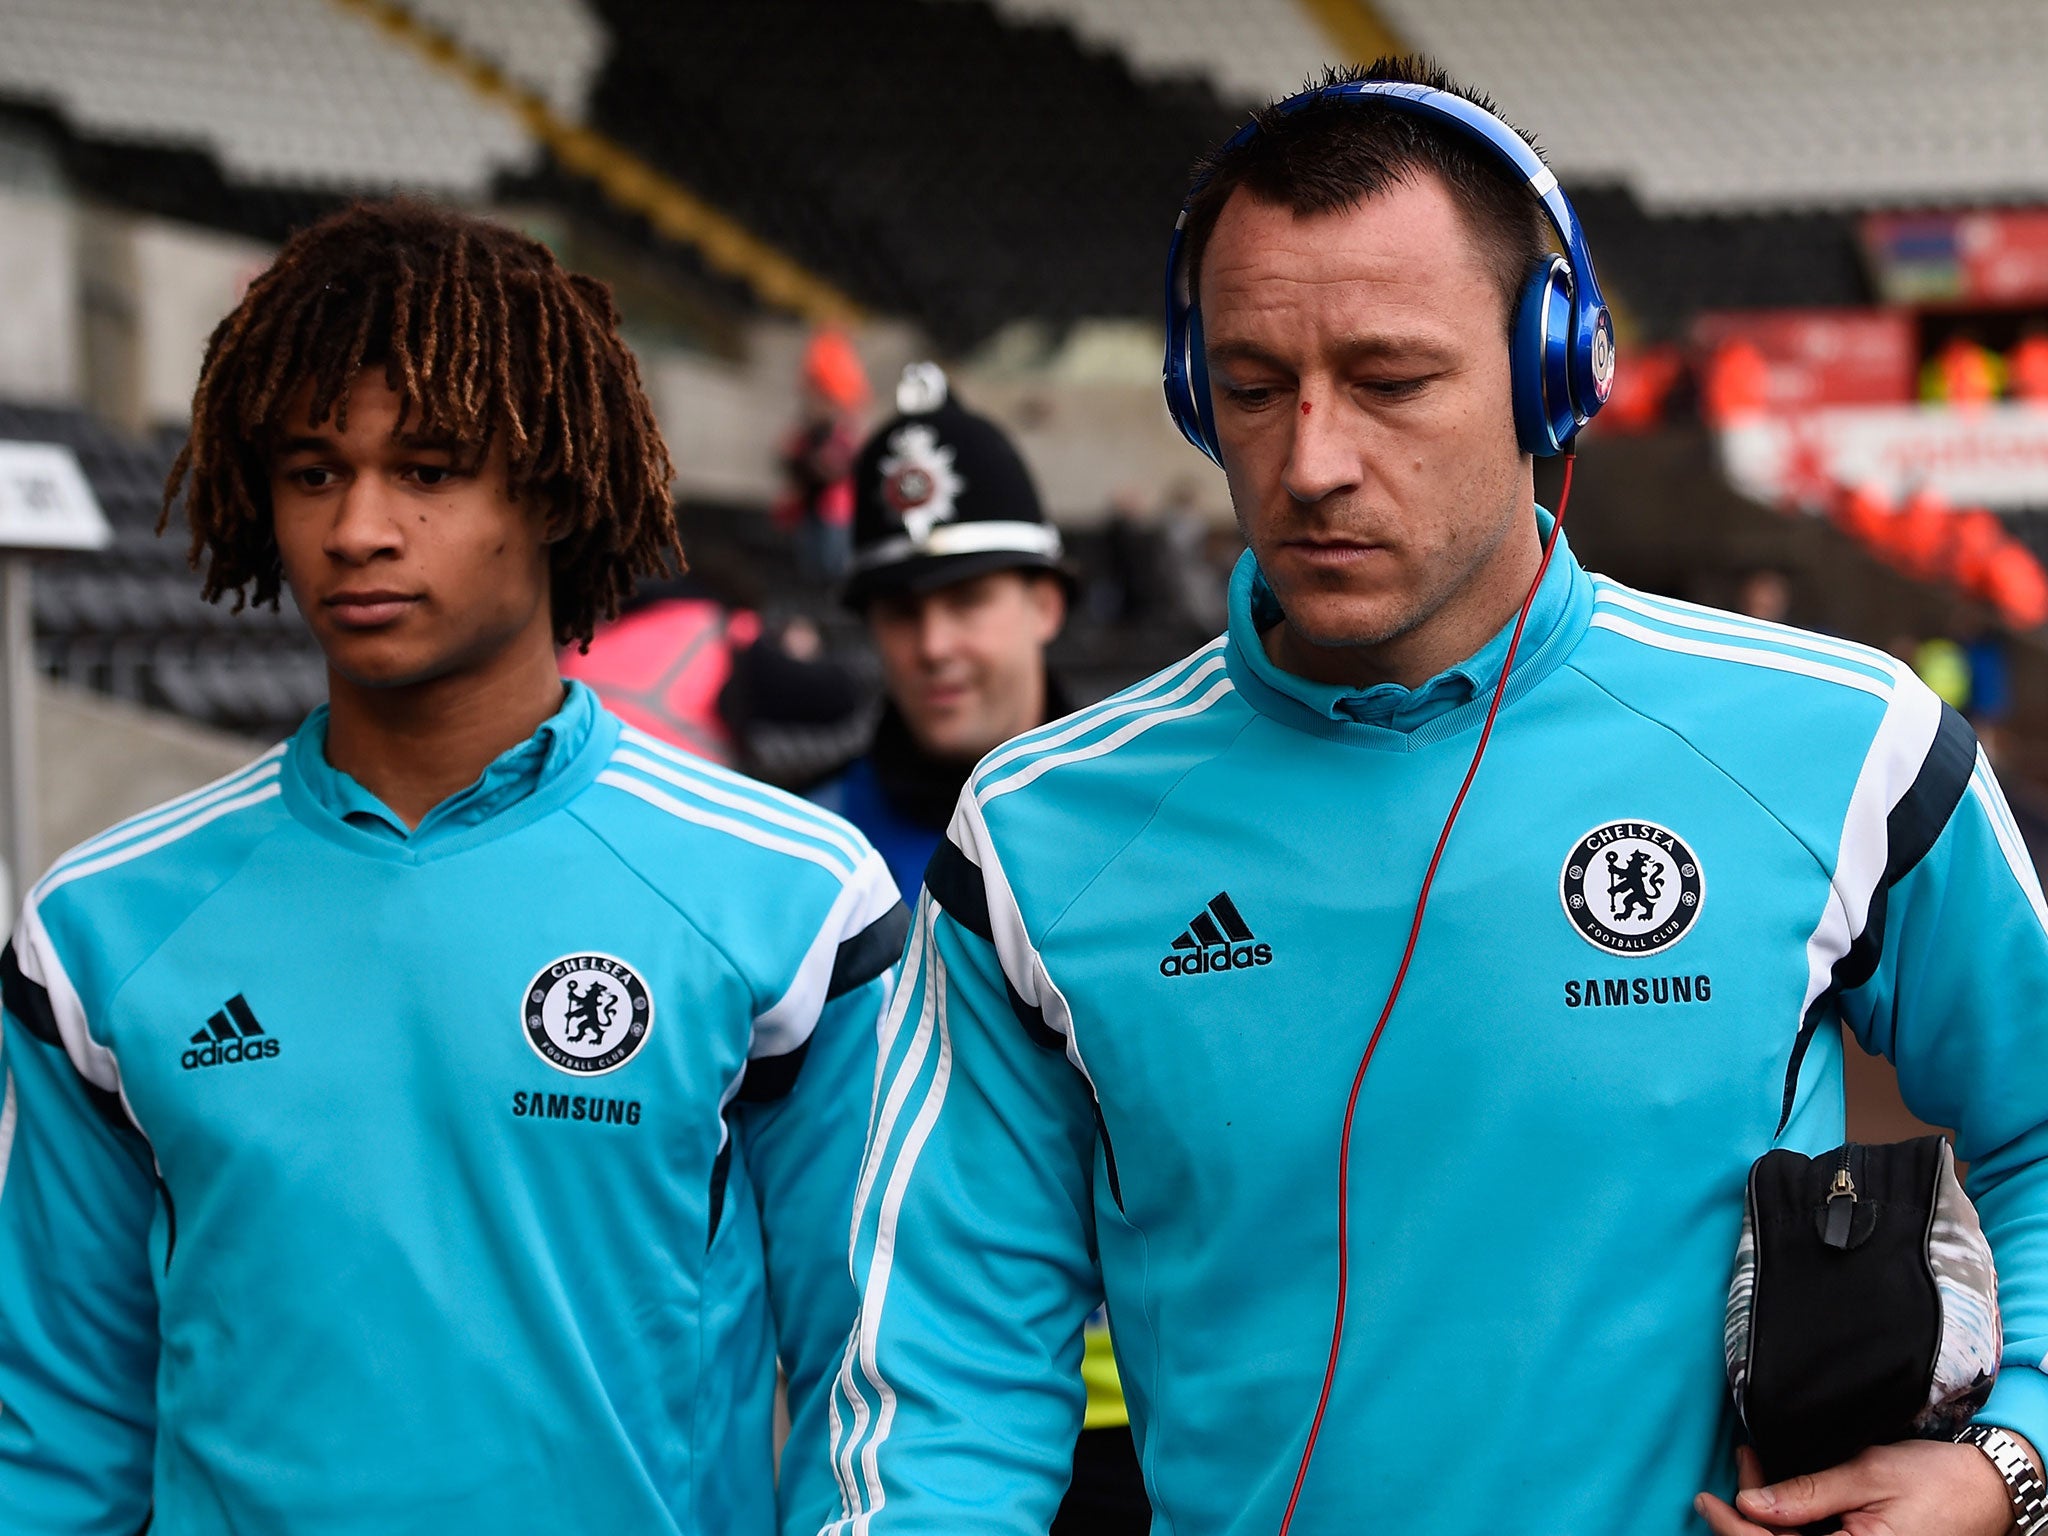 Nathan Ake has been recalled to Chelsea after impressing with Bournemouth